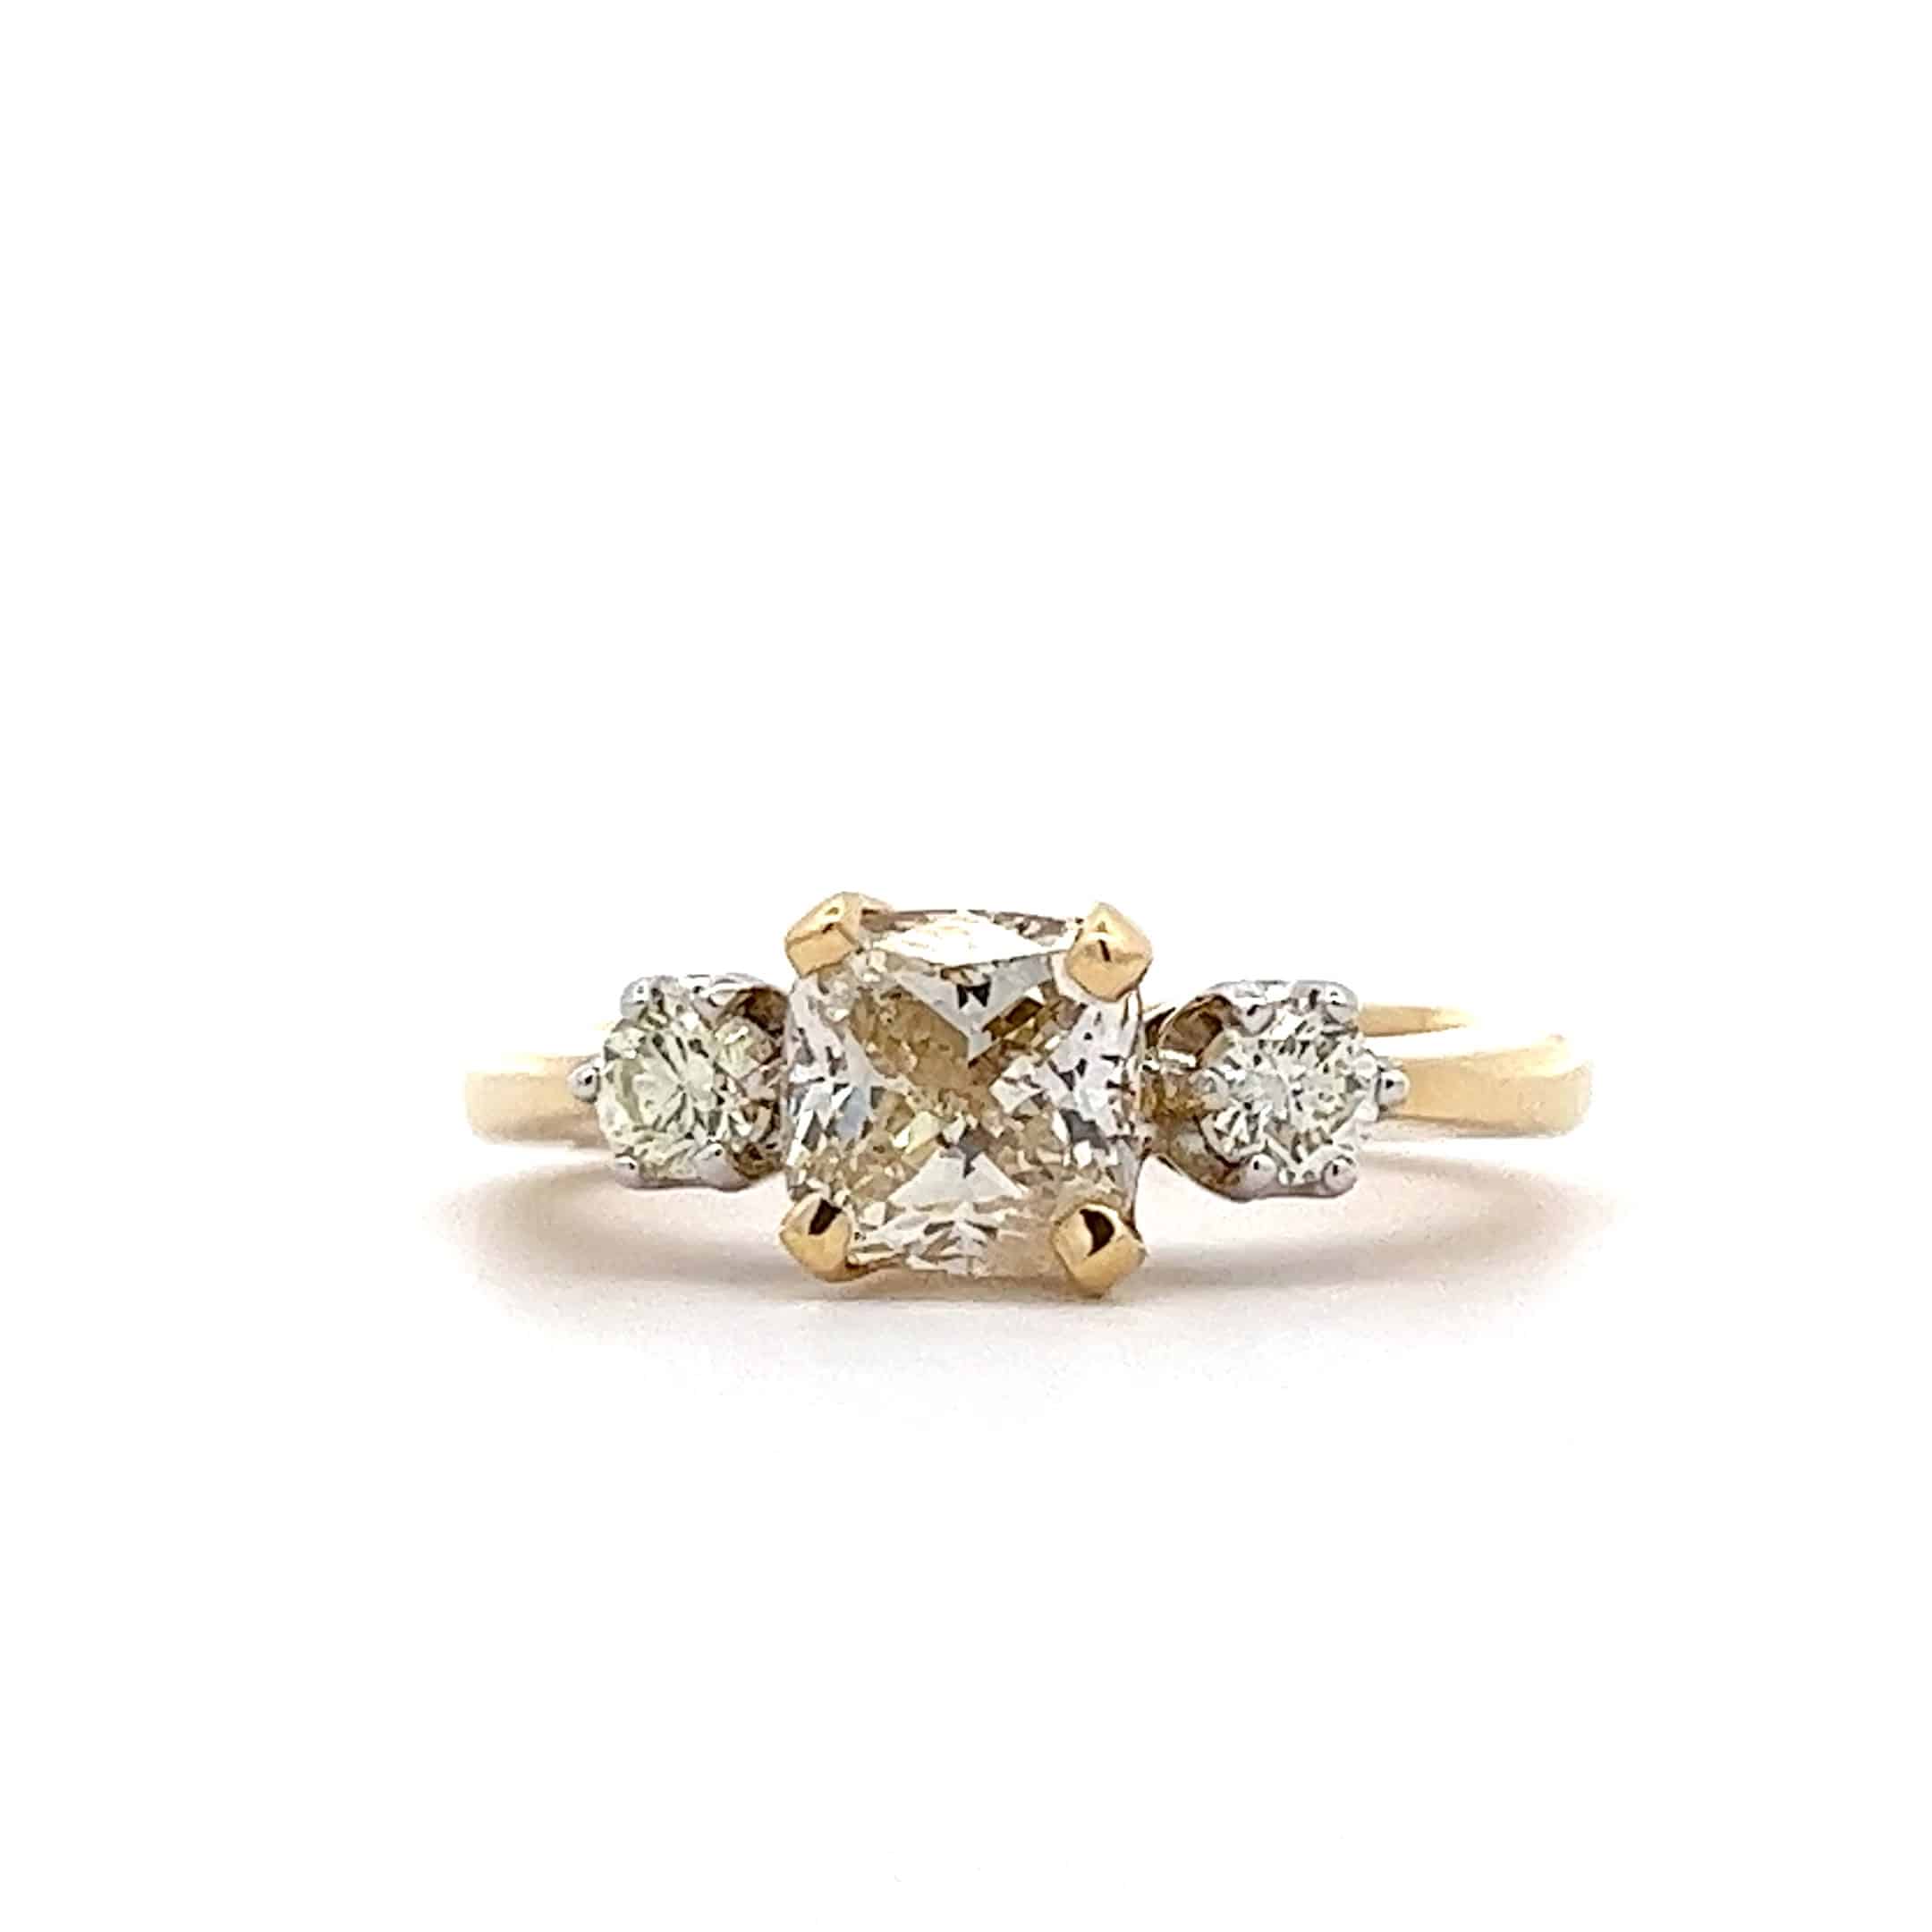 3 Stone Diamond Ring with Radiant Cut Center Stone – 1.52ct Centre Stone